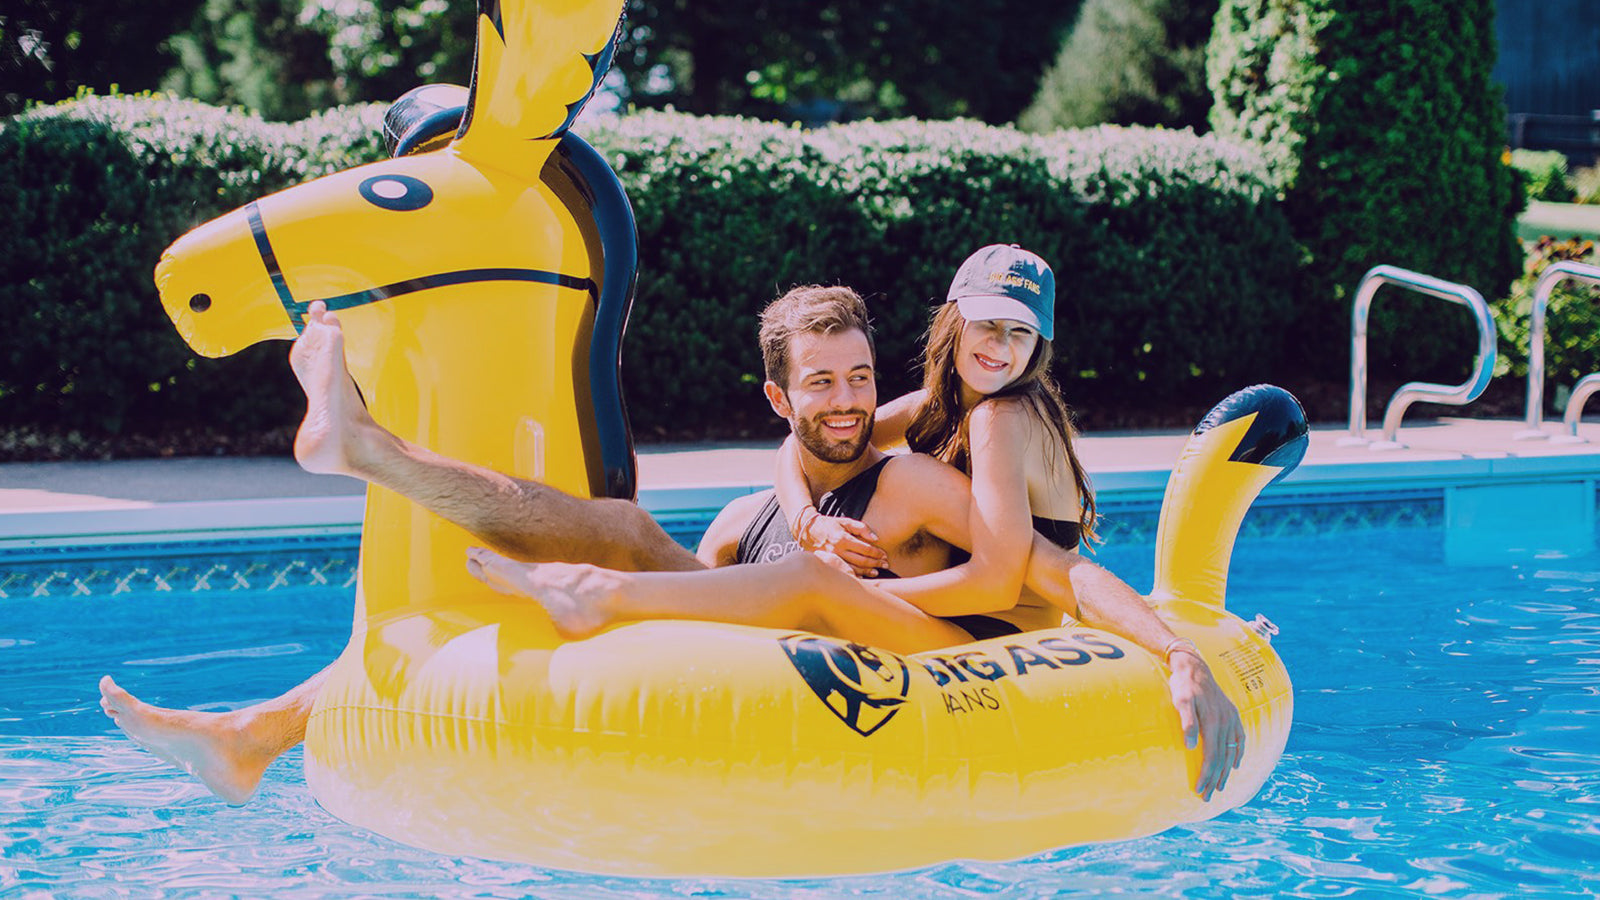 Custom Pool Floats  Design Your Own Pool Inflatables